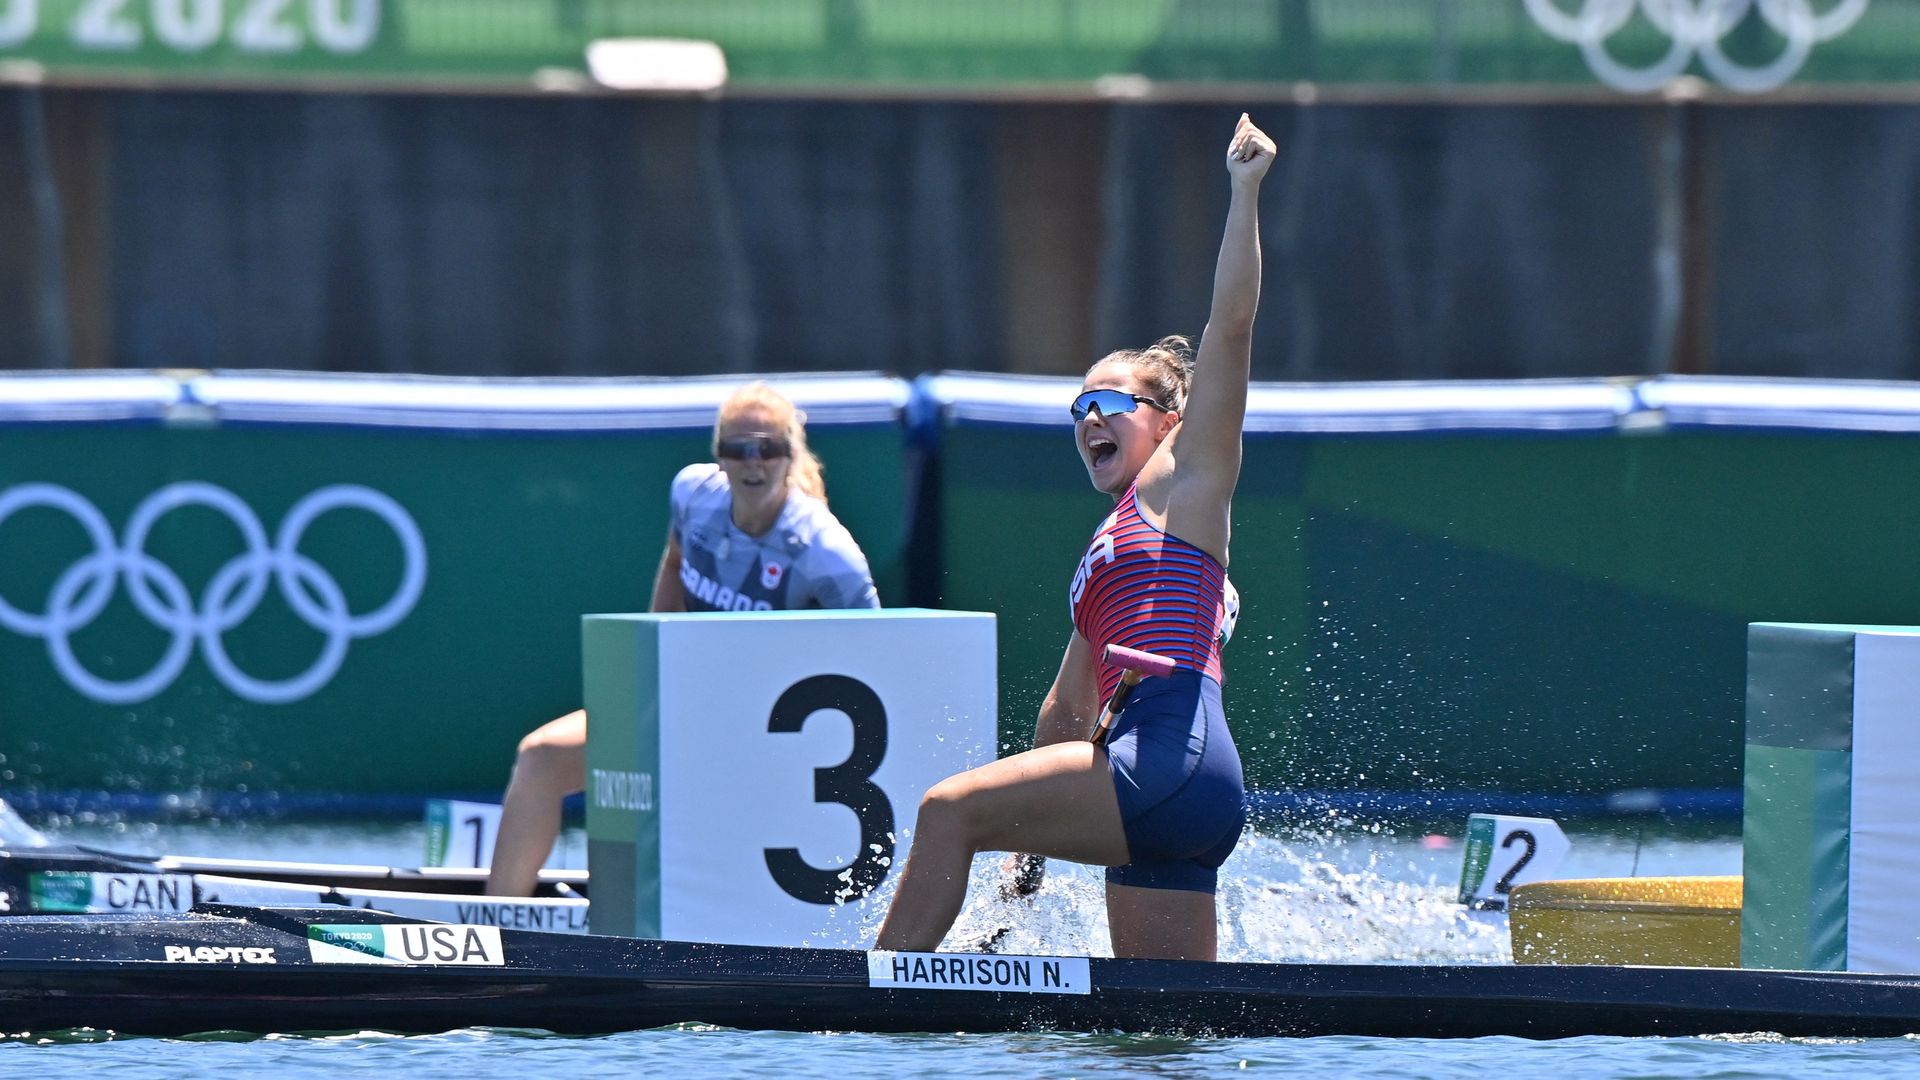 USA's Nevin Harrison celebrates after winning gold in the women's canoe single 200m final during the Tokyo 2020 Olympic Games at Sea Forest Waterway in Tokyo on August 5